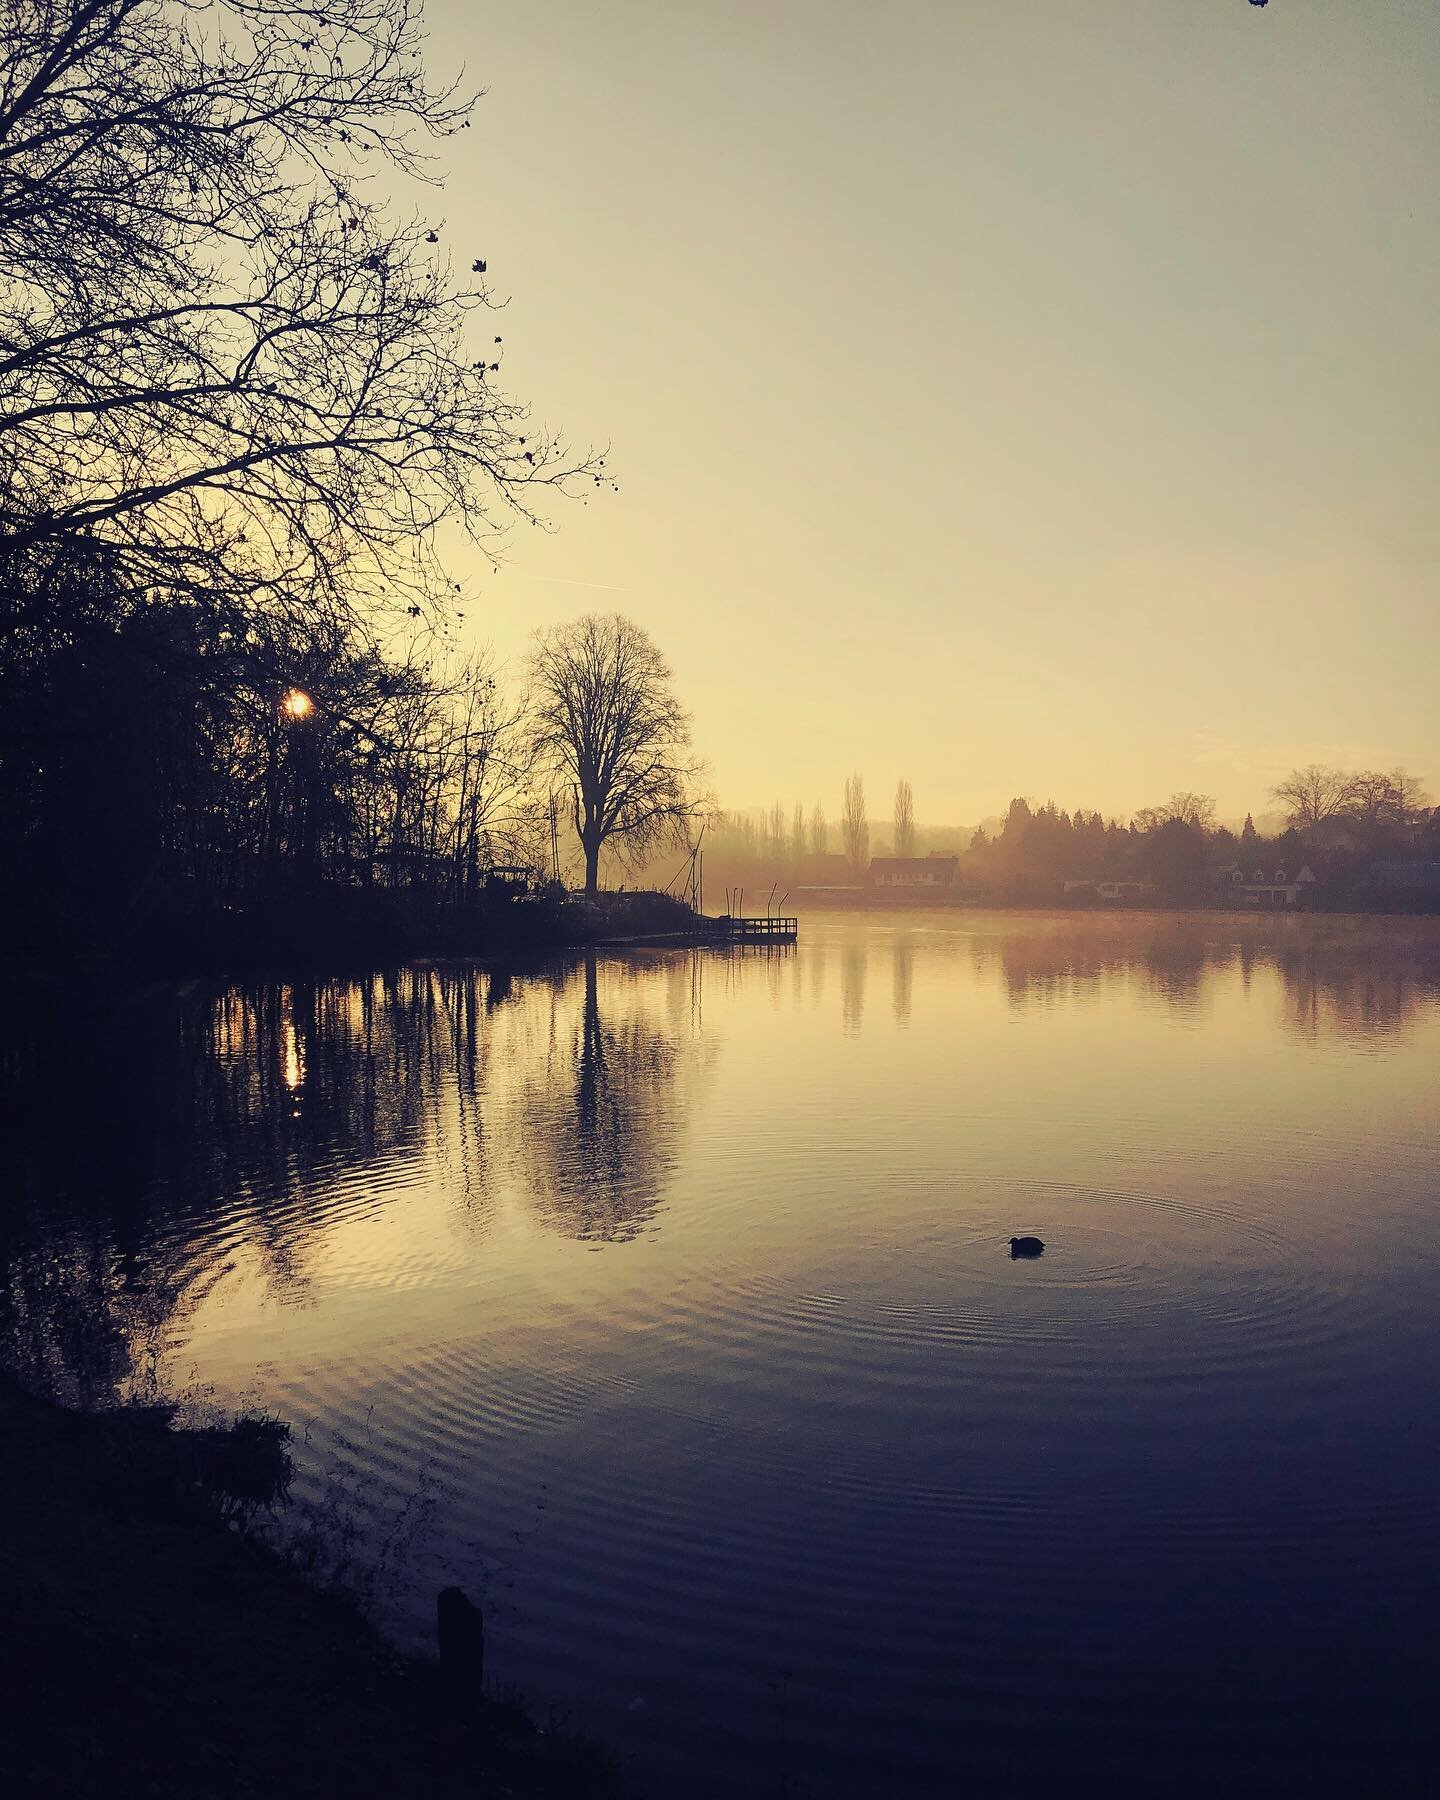 How do you start the week-end? 

After a long working week, I needed an early walk.

It&rsquo;s so wonderful to enjoy the quiet of the sun rising while looking at the mist from the lake. I shared the moment with joggers. 

A few years back, I would t